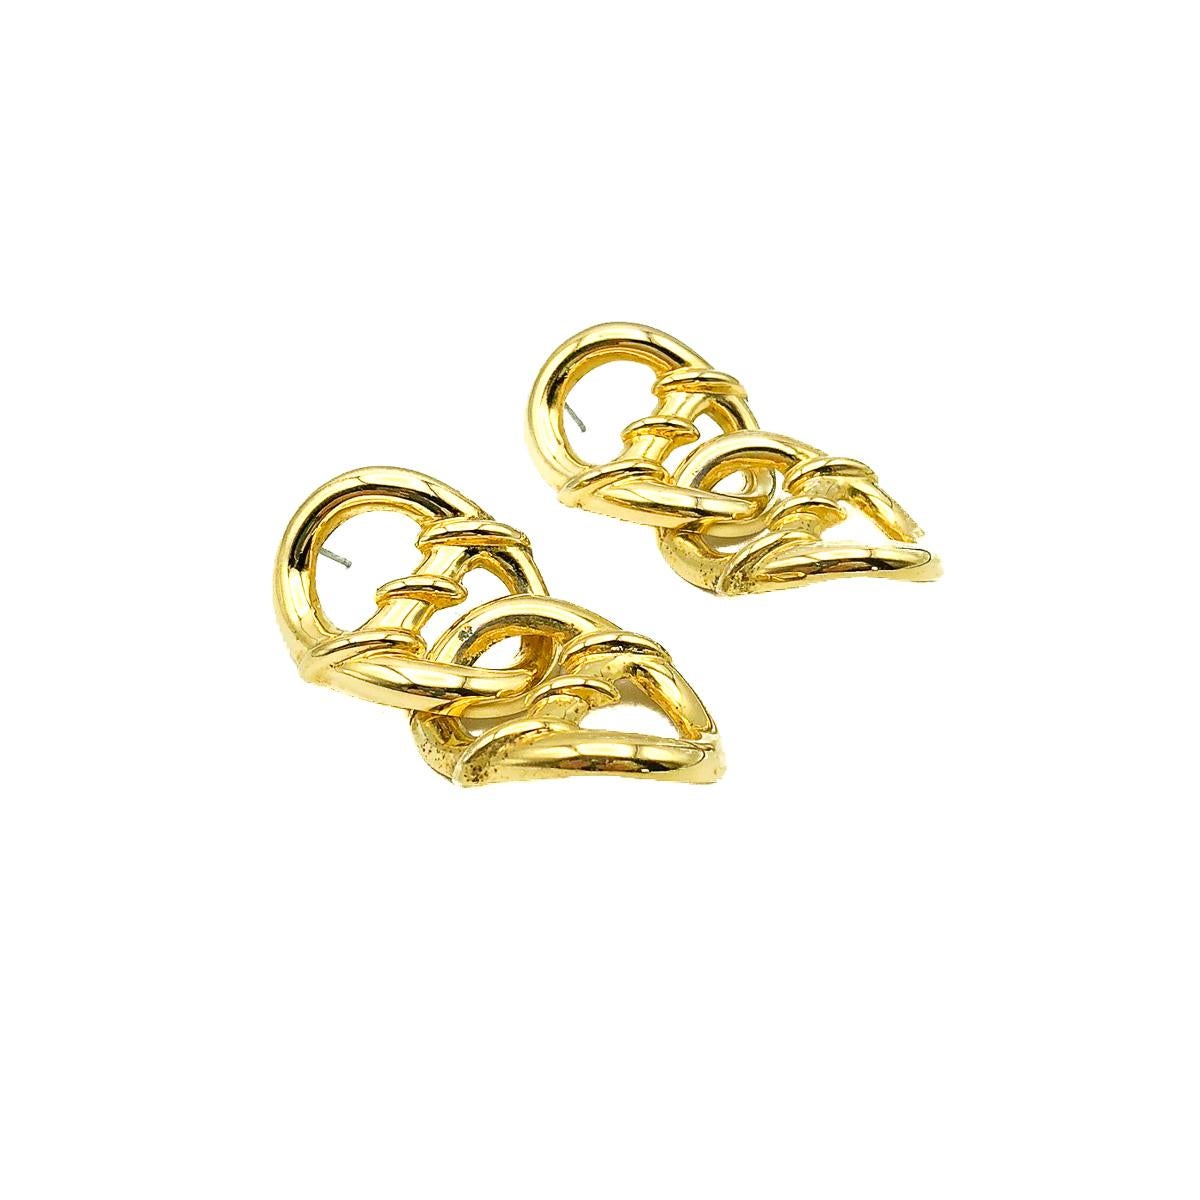 Vintage Double Mariner Earrings. Featuring a double mariner inspired link. 
Vintage Condition: Very good without damage or noteworthy wear. 
Materials: Gold Plated Metal
Signed: Unsigned
Fastening: Post for Pierced Ears
Approximate Dimensions: